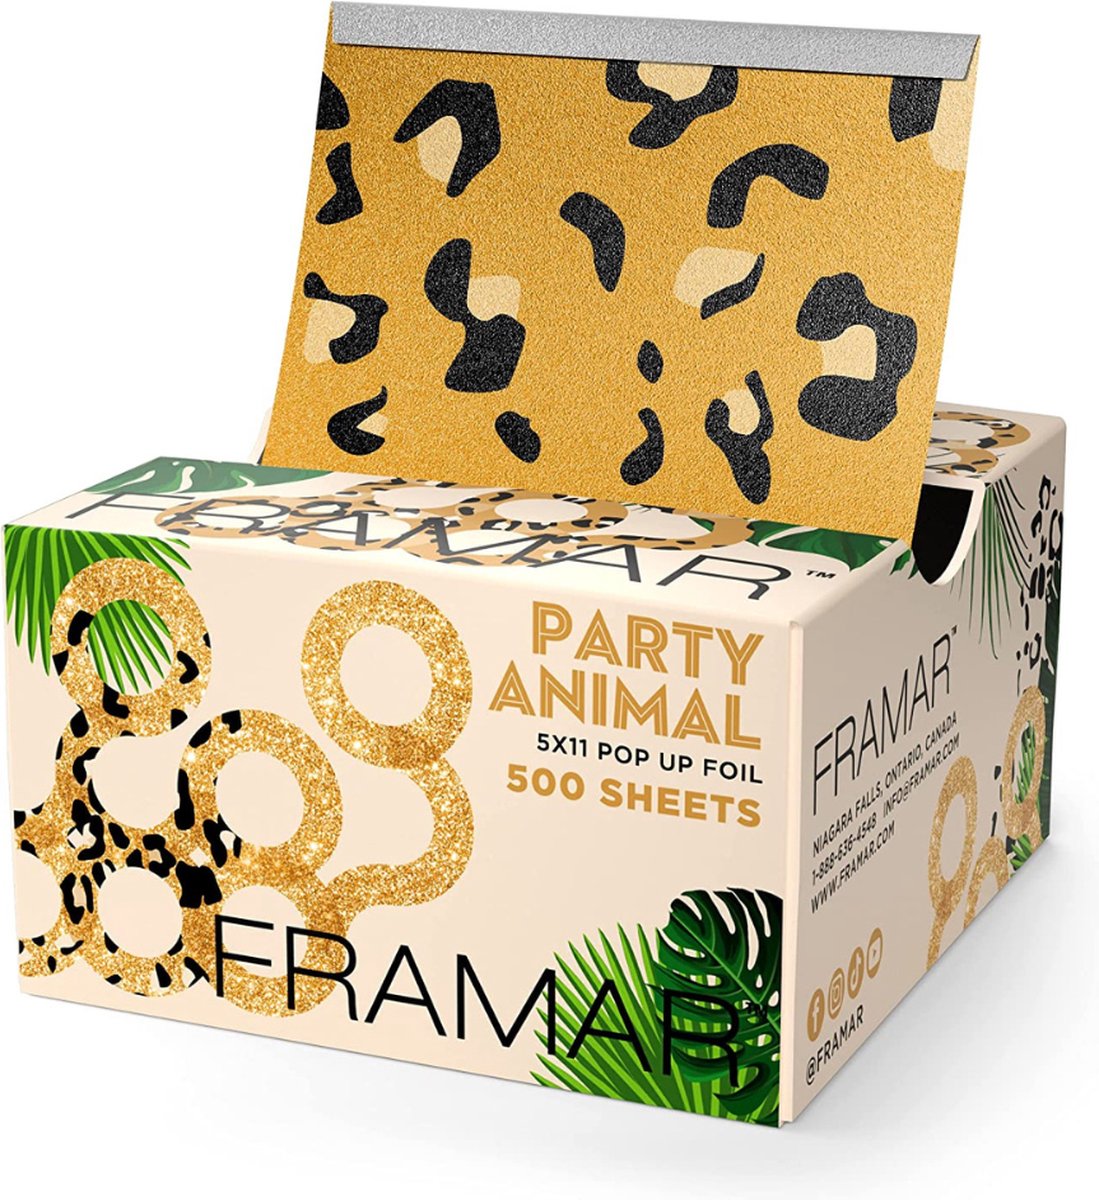 Framar Party Animal Pop-up 500 sheets